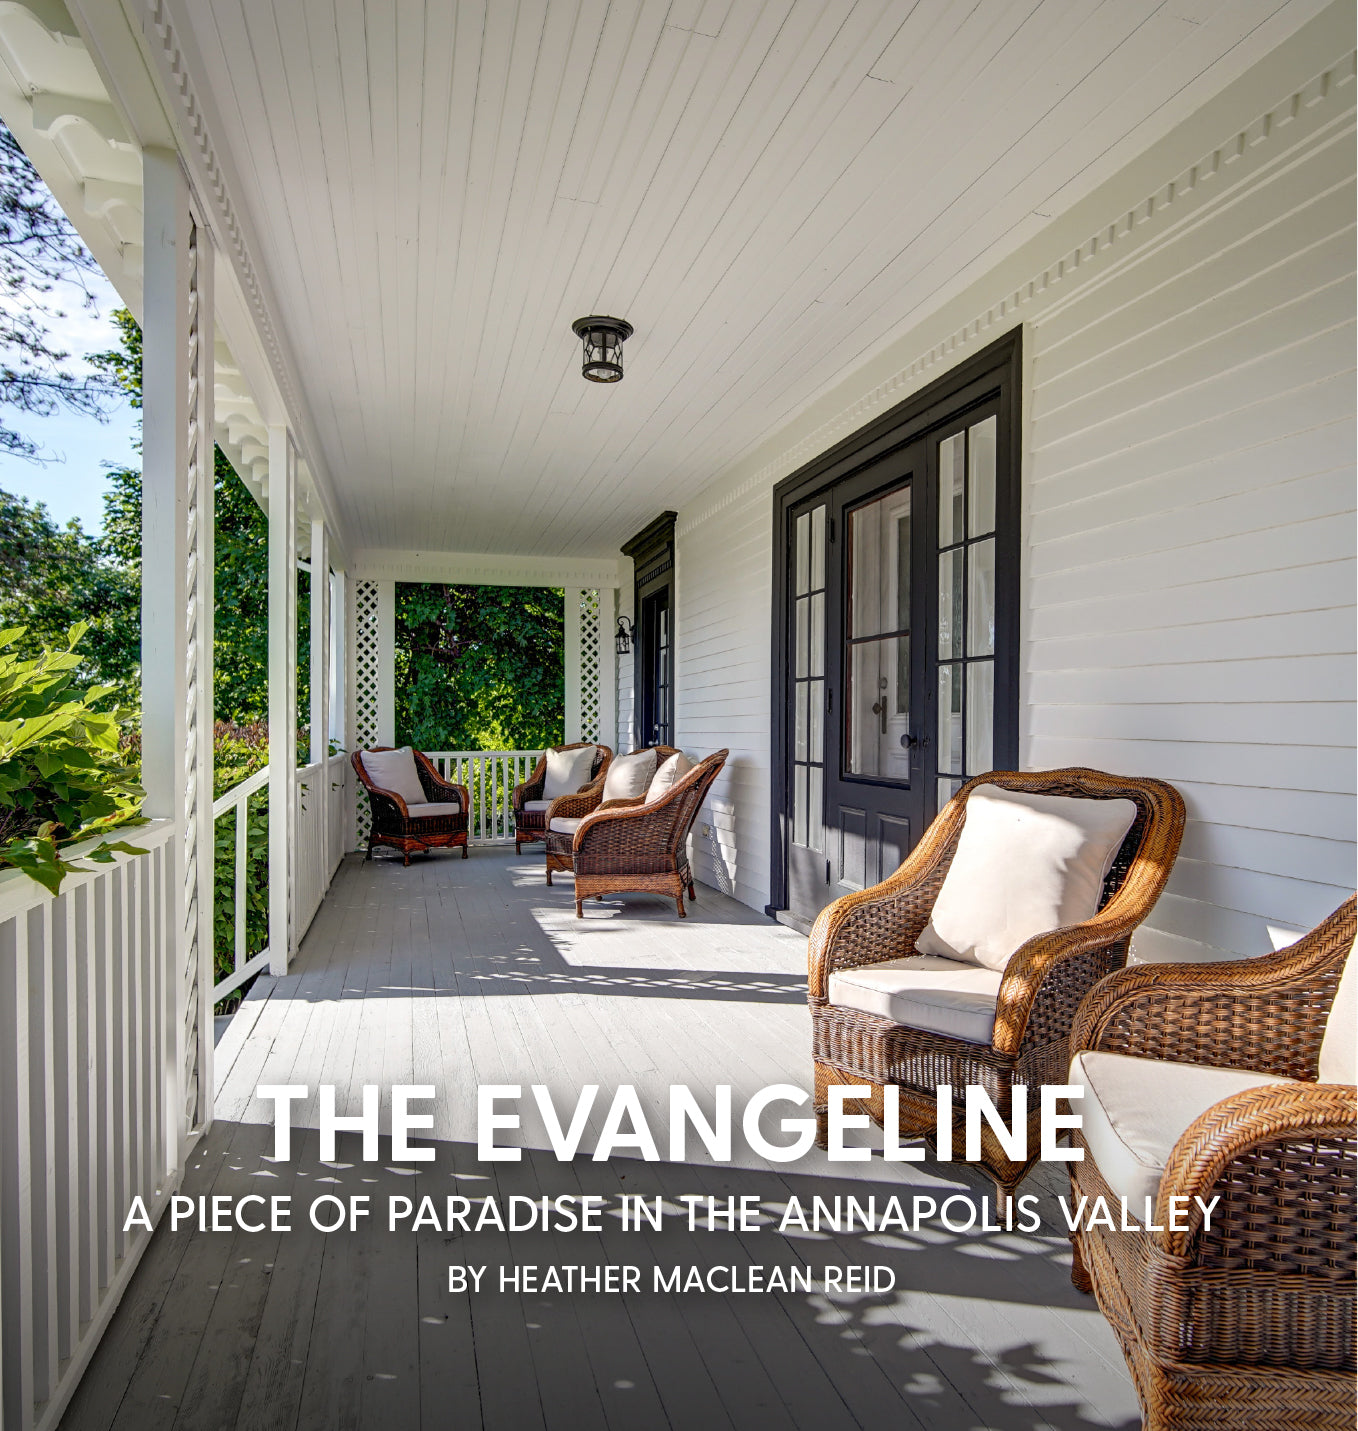 THE EVANGELINE A PIECE OF PARADISE IN THE ANNAPOLIS VALLEY BY HEATHER MACLEAN REID